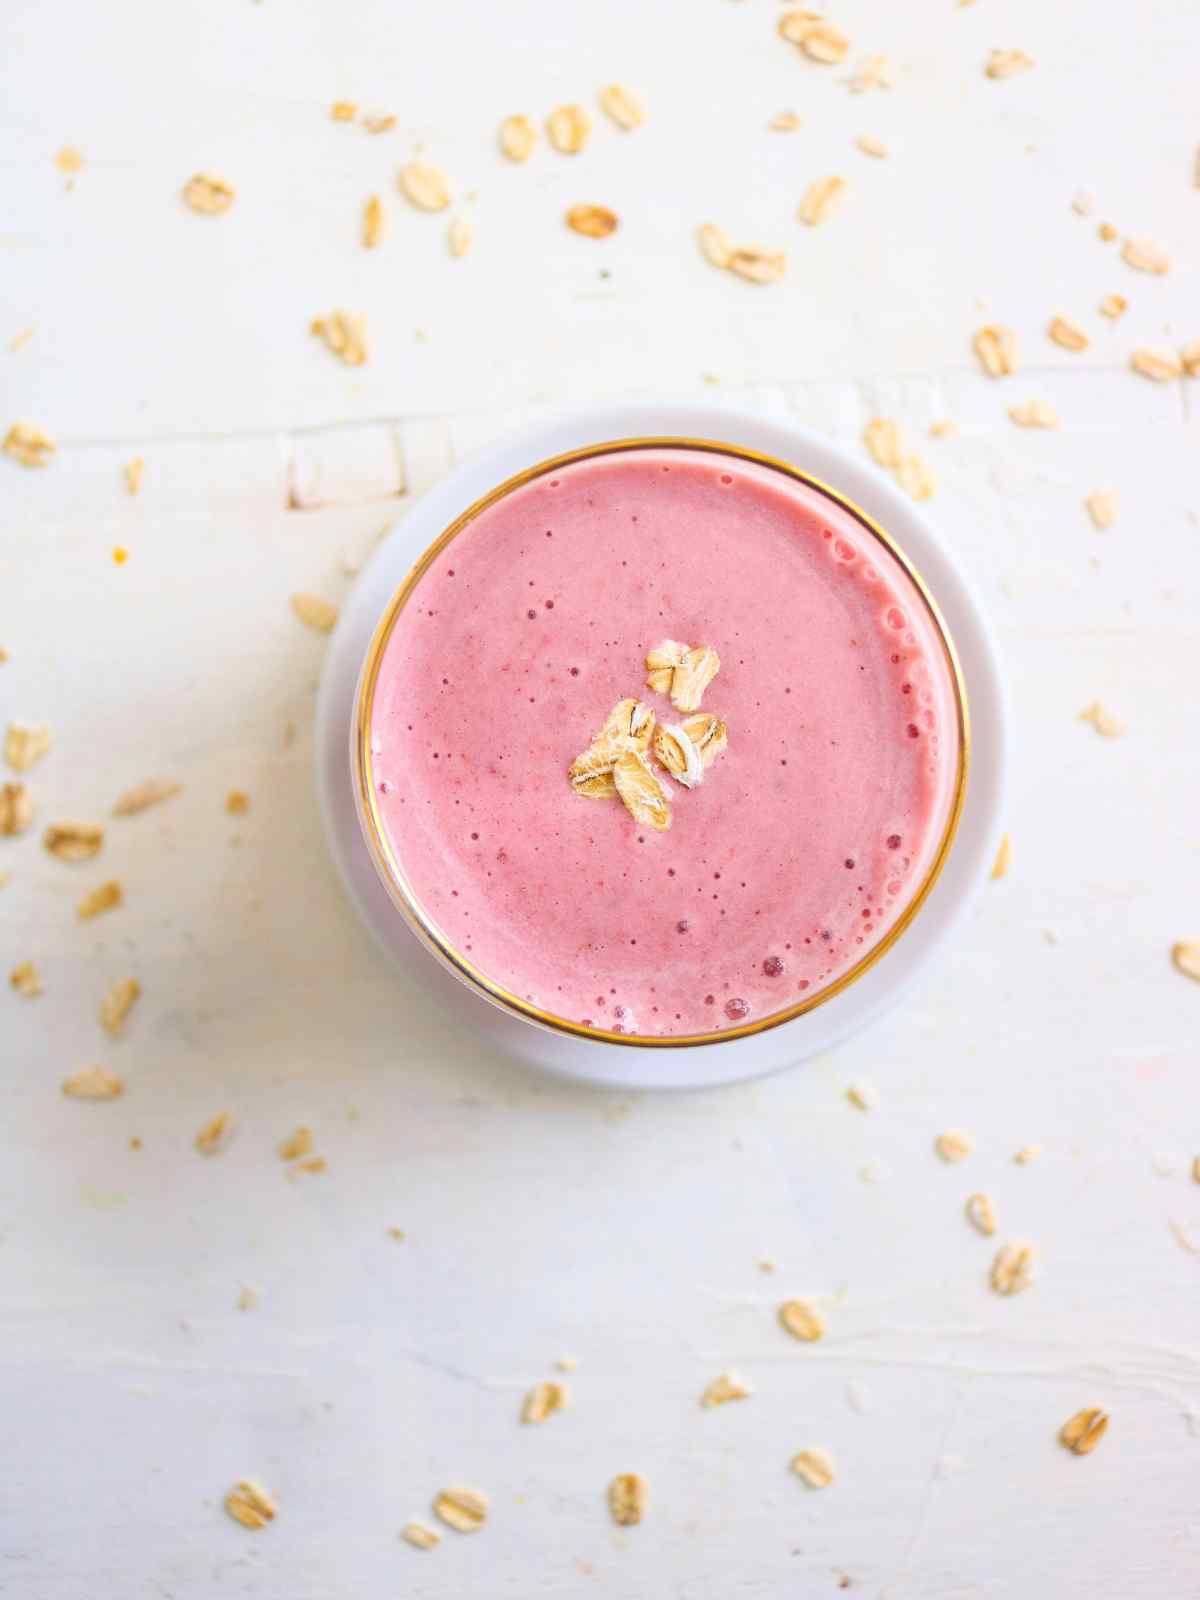 Smoothie glass placed on a white surface and oats sprinkled on background.